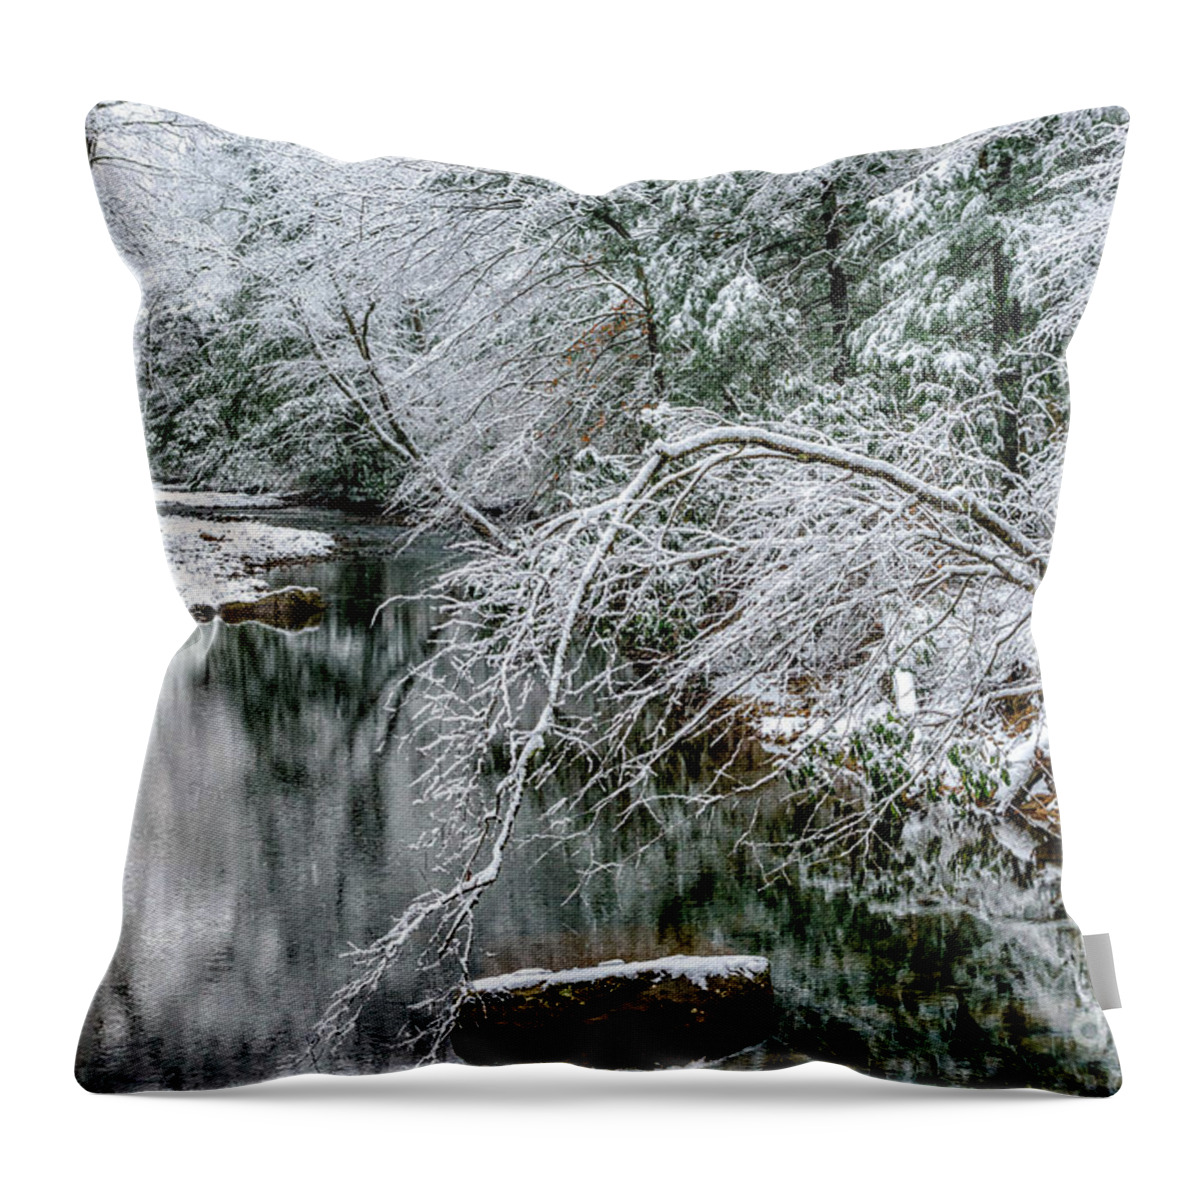 Cranberry River Throw Pillow featuring the photograph March Snow Cranberry River #1 by Thomas R Fletcher